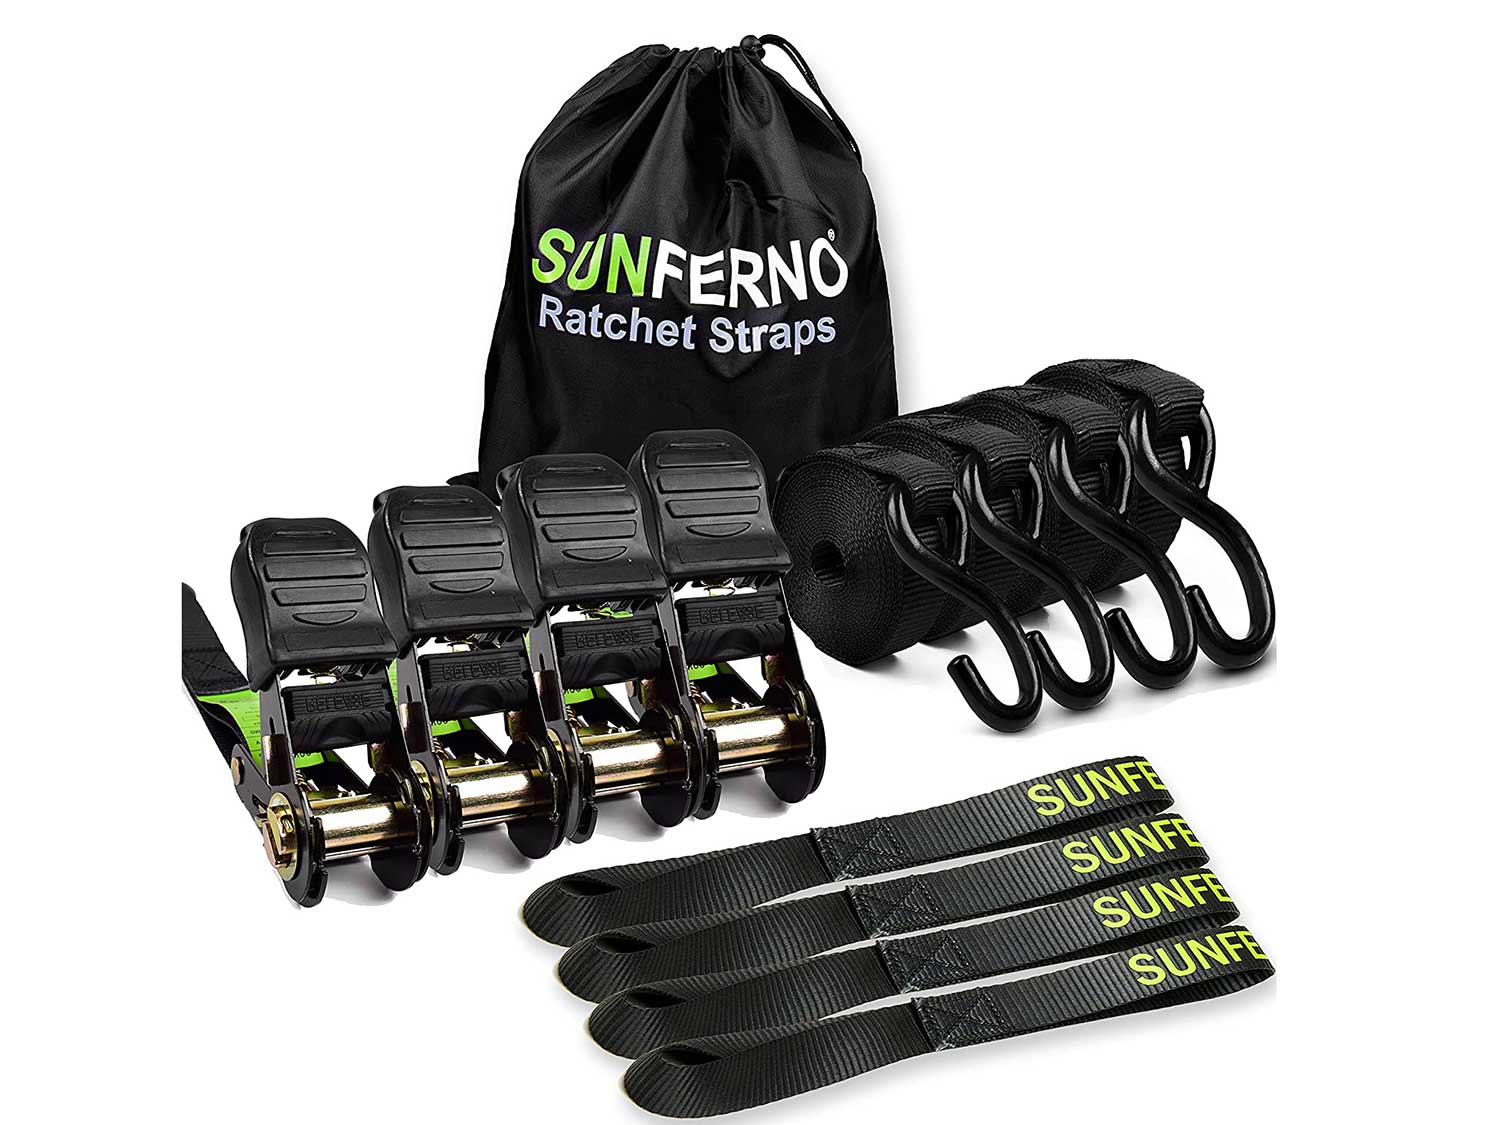 Sunferno Ratchet Straps Tie Down 2500Lbs Break Strength, 15 Foot - Heavy Duty Straps To Safely Move Your Motorcycle and Cargo - Includes 4 Pack Soft Loop Straps - Black (4 Pack)